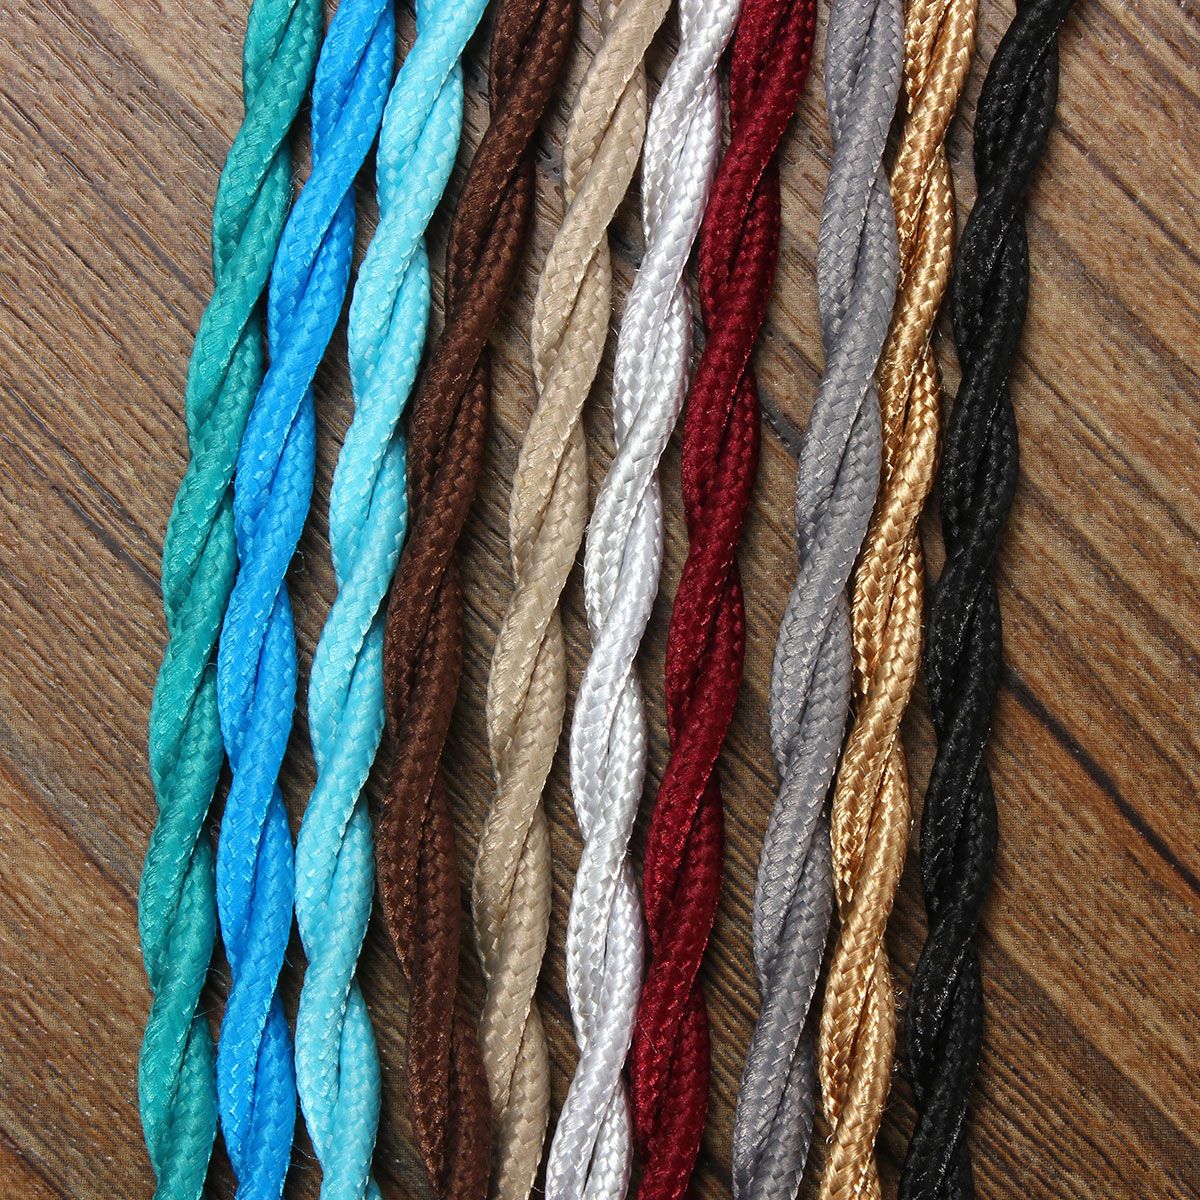 3M-Vintage-2-Core-Twist-Braided-Fabric-Cable-Wire-Electric-Lighting-Cord-1068748